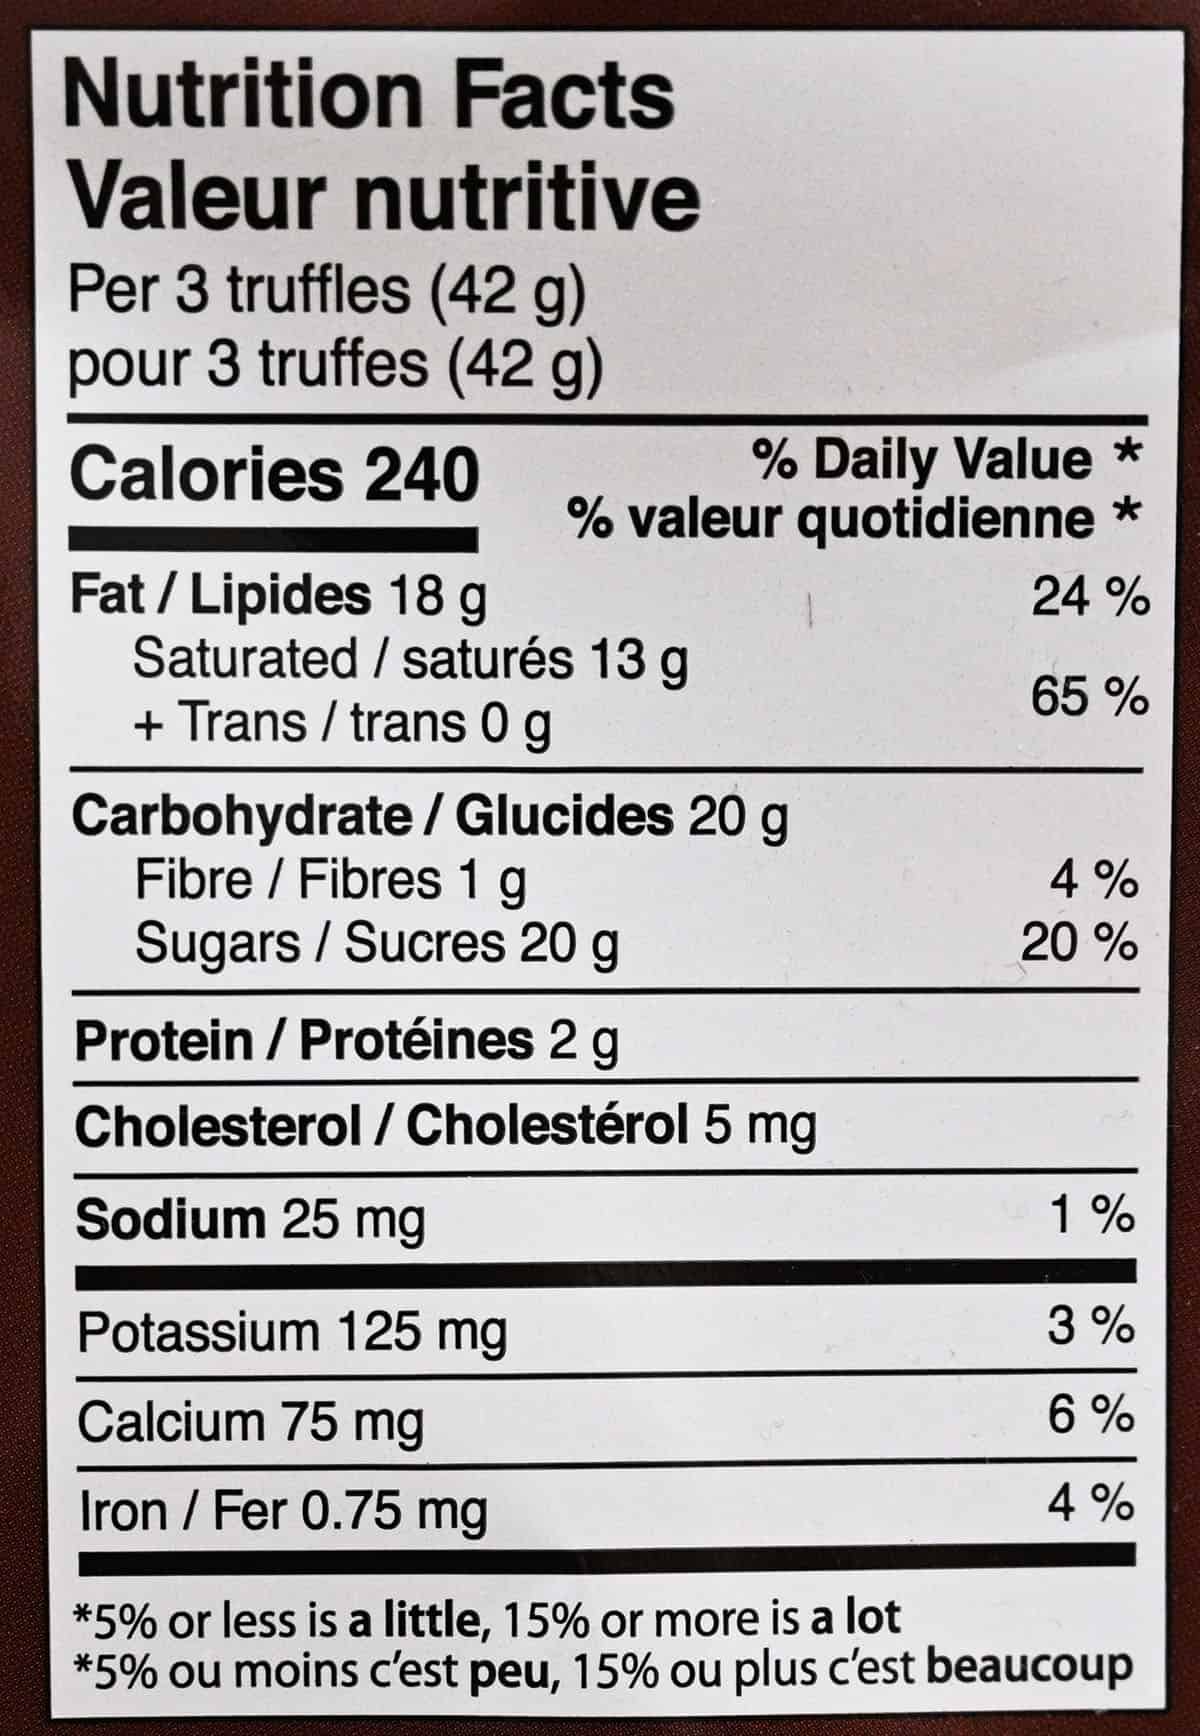 Image of the nutrition facts for the milk chocolate mint truffles from the package.